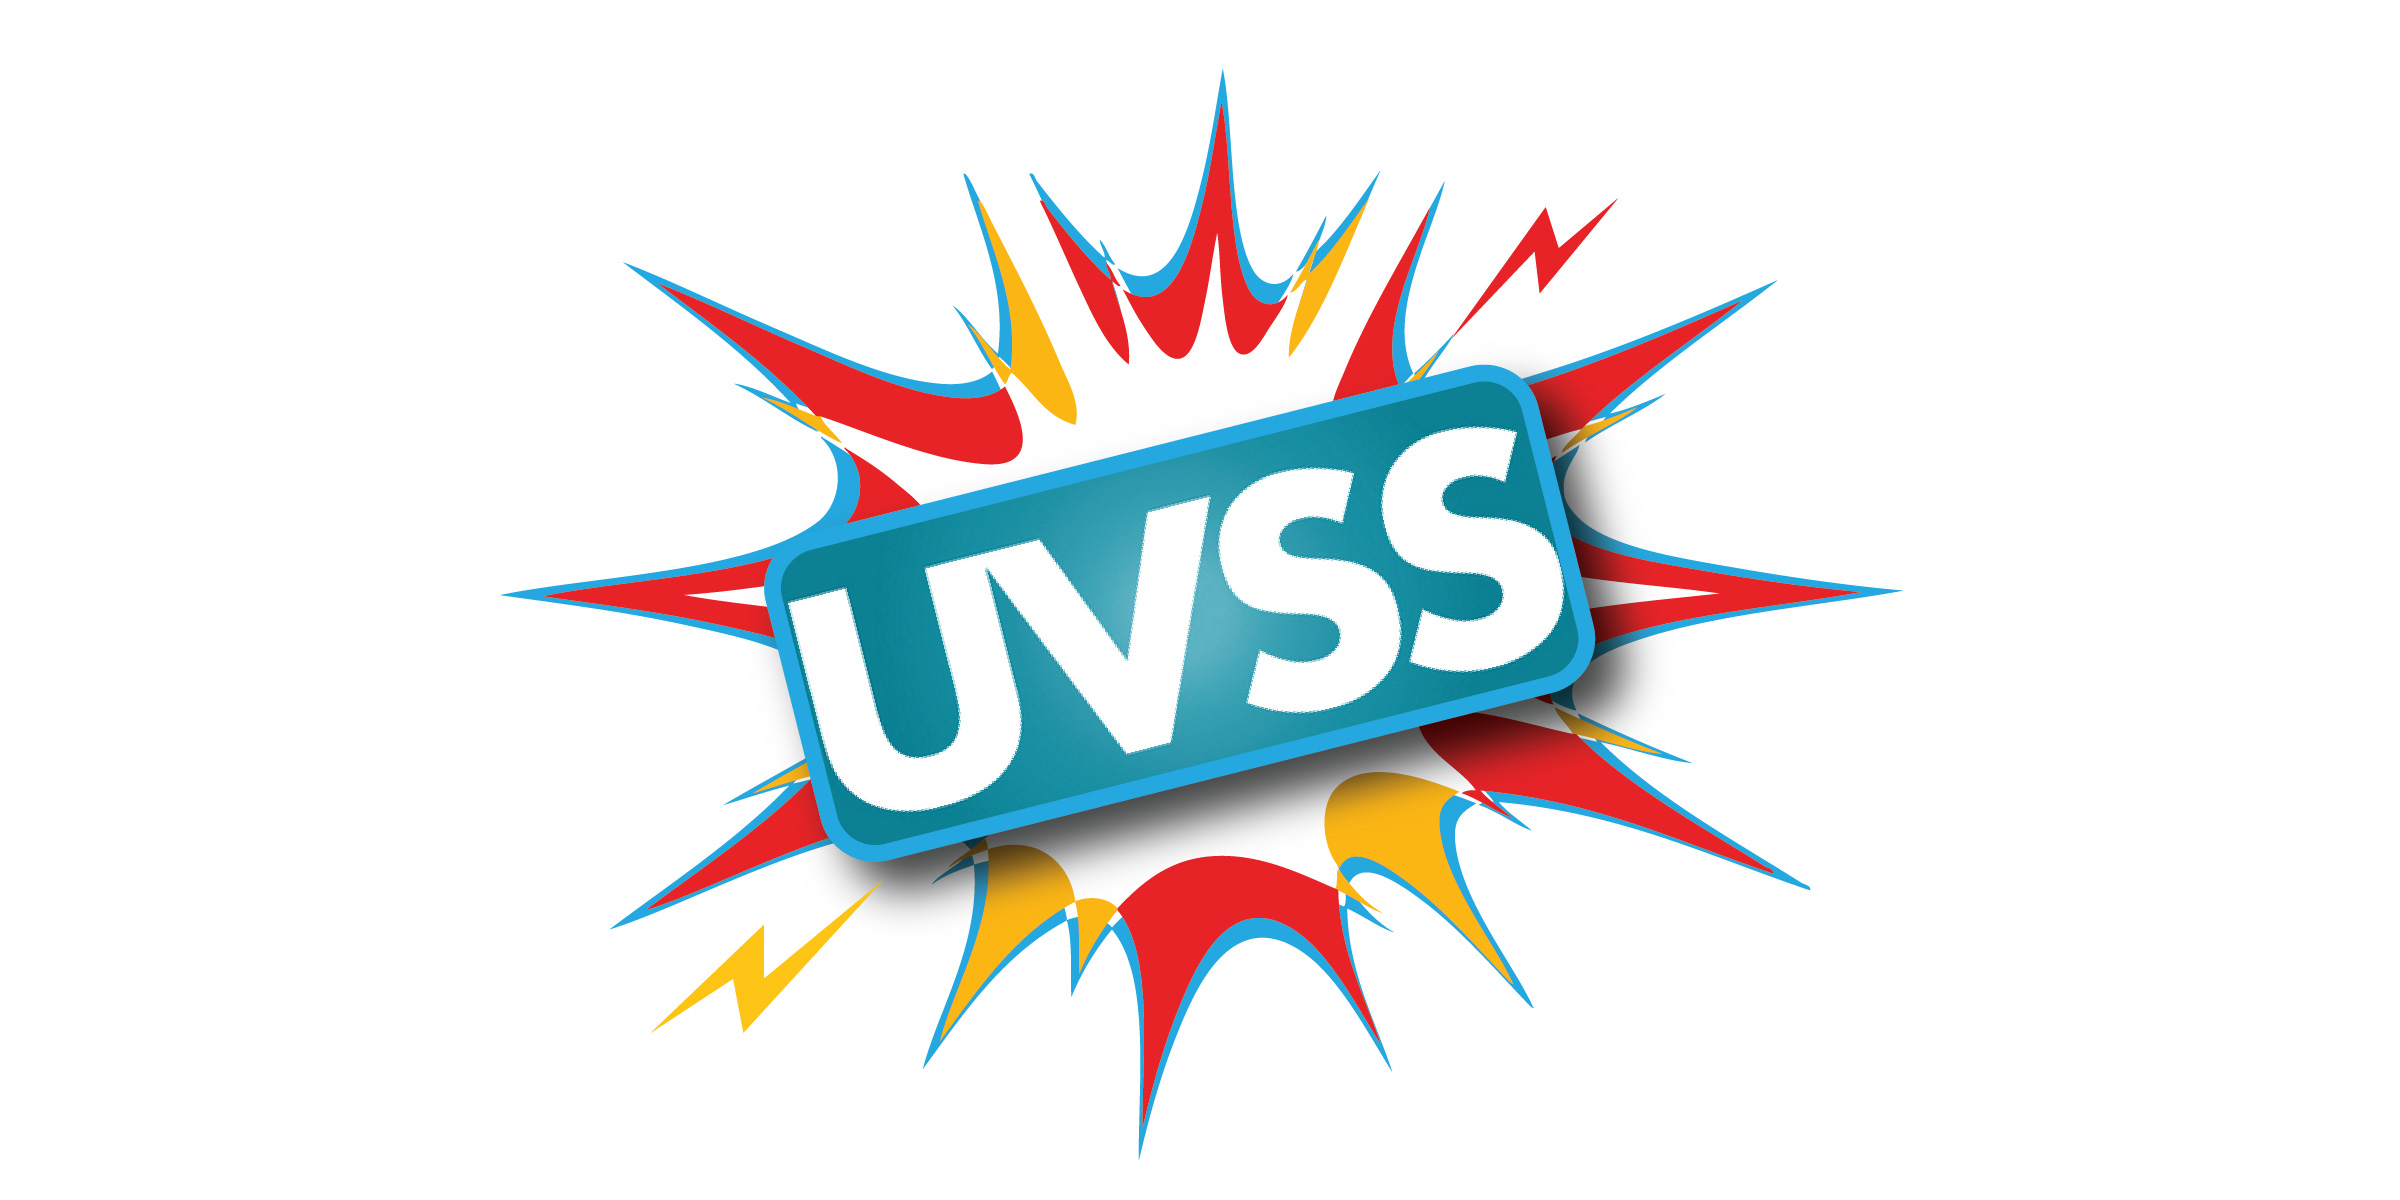 UVSS board puts funding of non-profit research group VIPIRG to a referendum